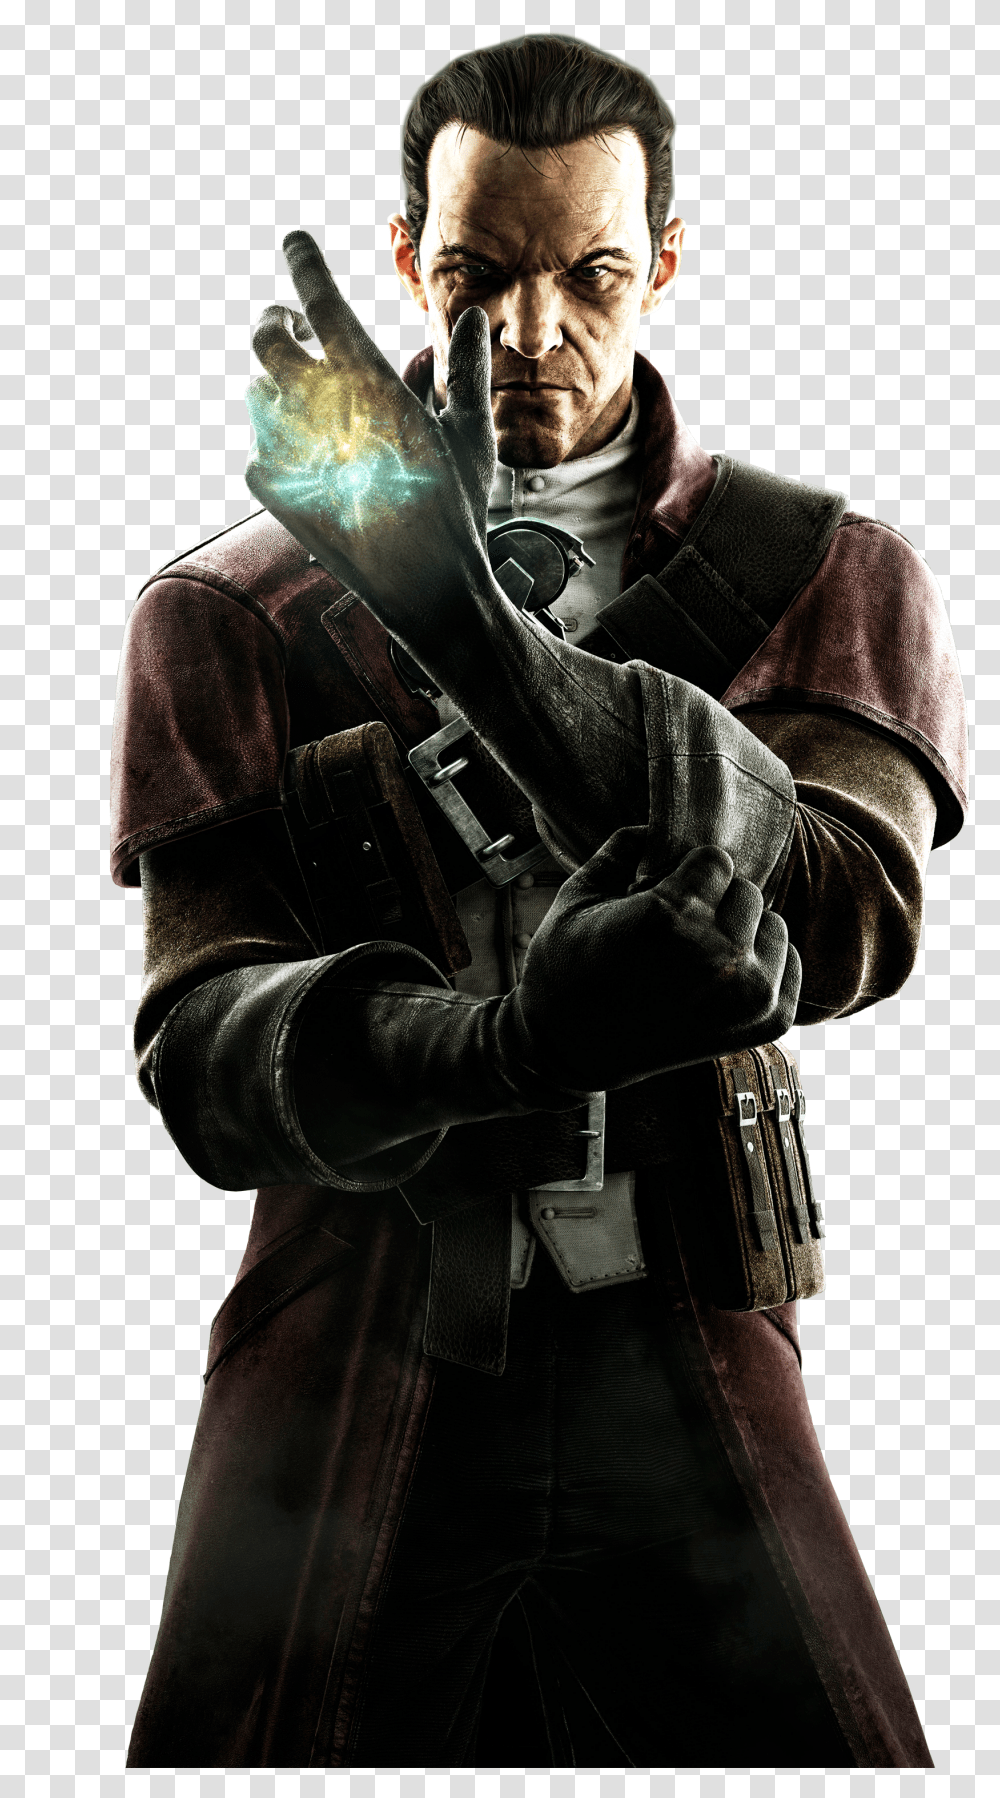 Kod Daud Dishonored The Knife Of Dunwall Transparent Png